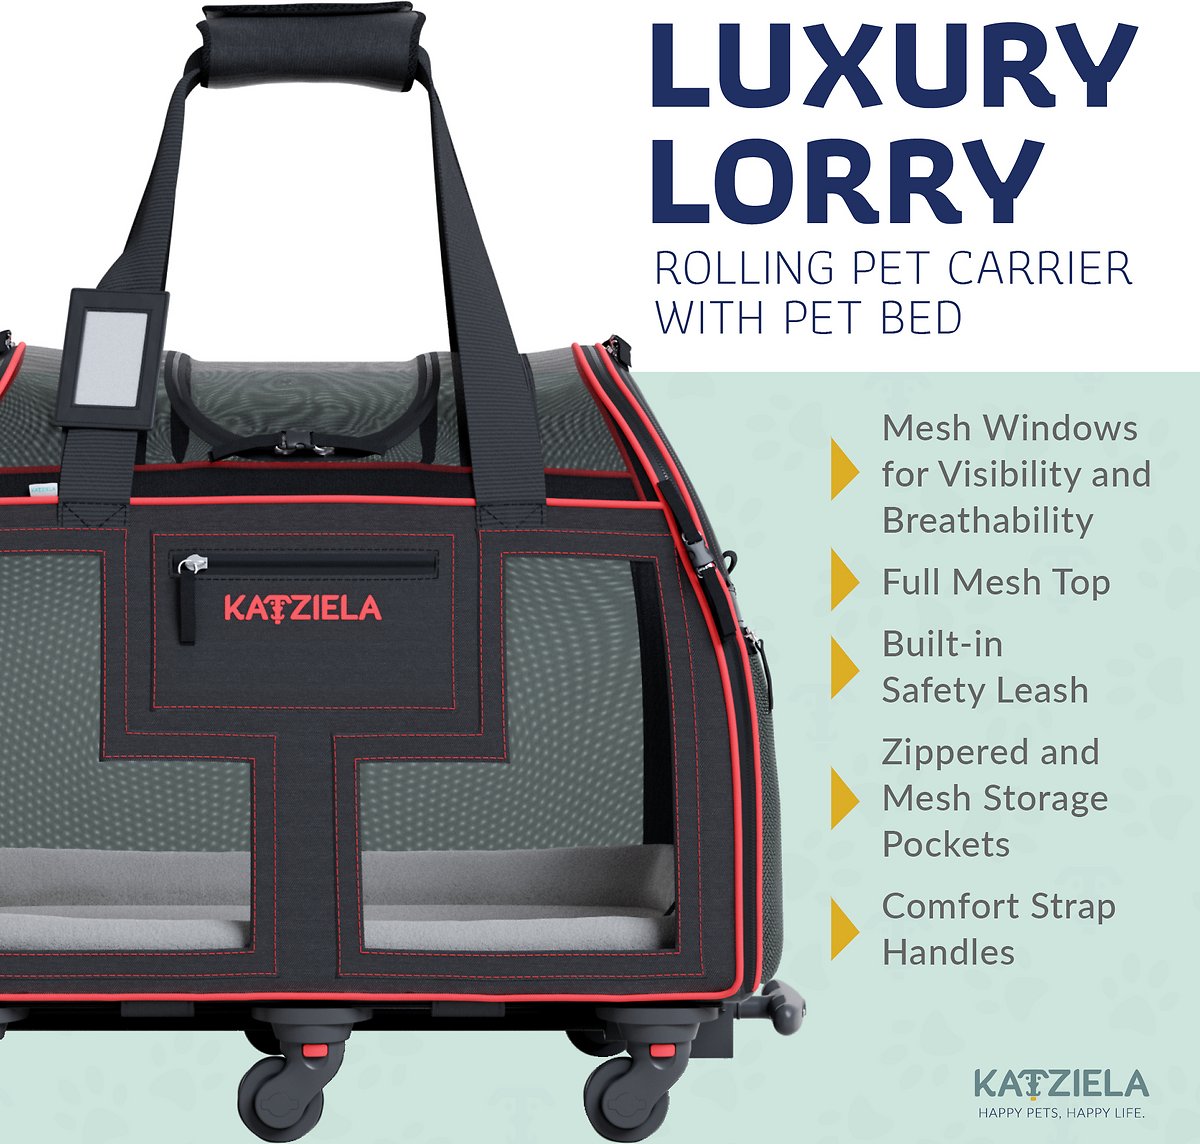 https://discounttoday.net/wp-content/uploads/2022/07/Katziela-Rolling-Pet-Carrier-Airline-Approved-Pet-Carrier-with-Wheels-Luxury-Lorry-Deluxe-TSA-Approved-Cat-Carrier-with-Wheels-Small-Airline-Approved-Dog-Carrier-Trolley-Plane-Carry-On-Bag3-1.jpg